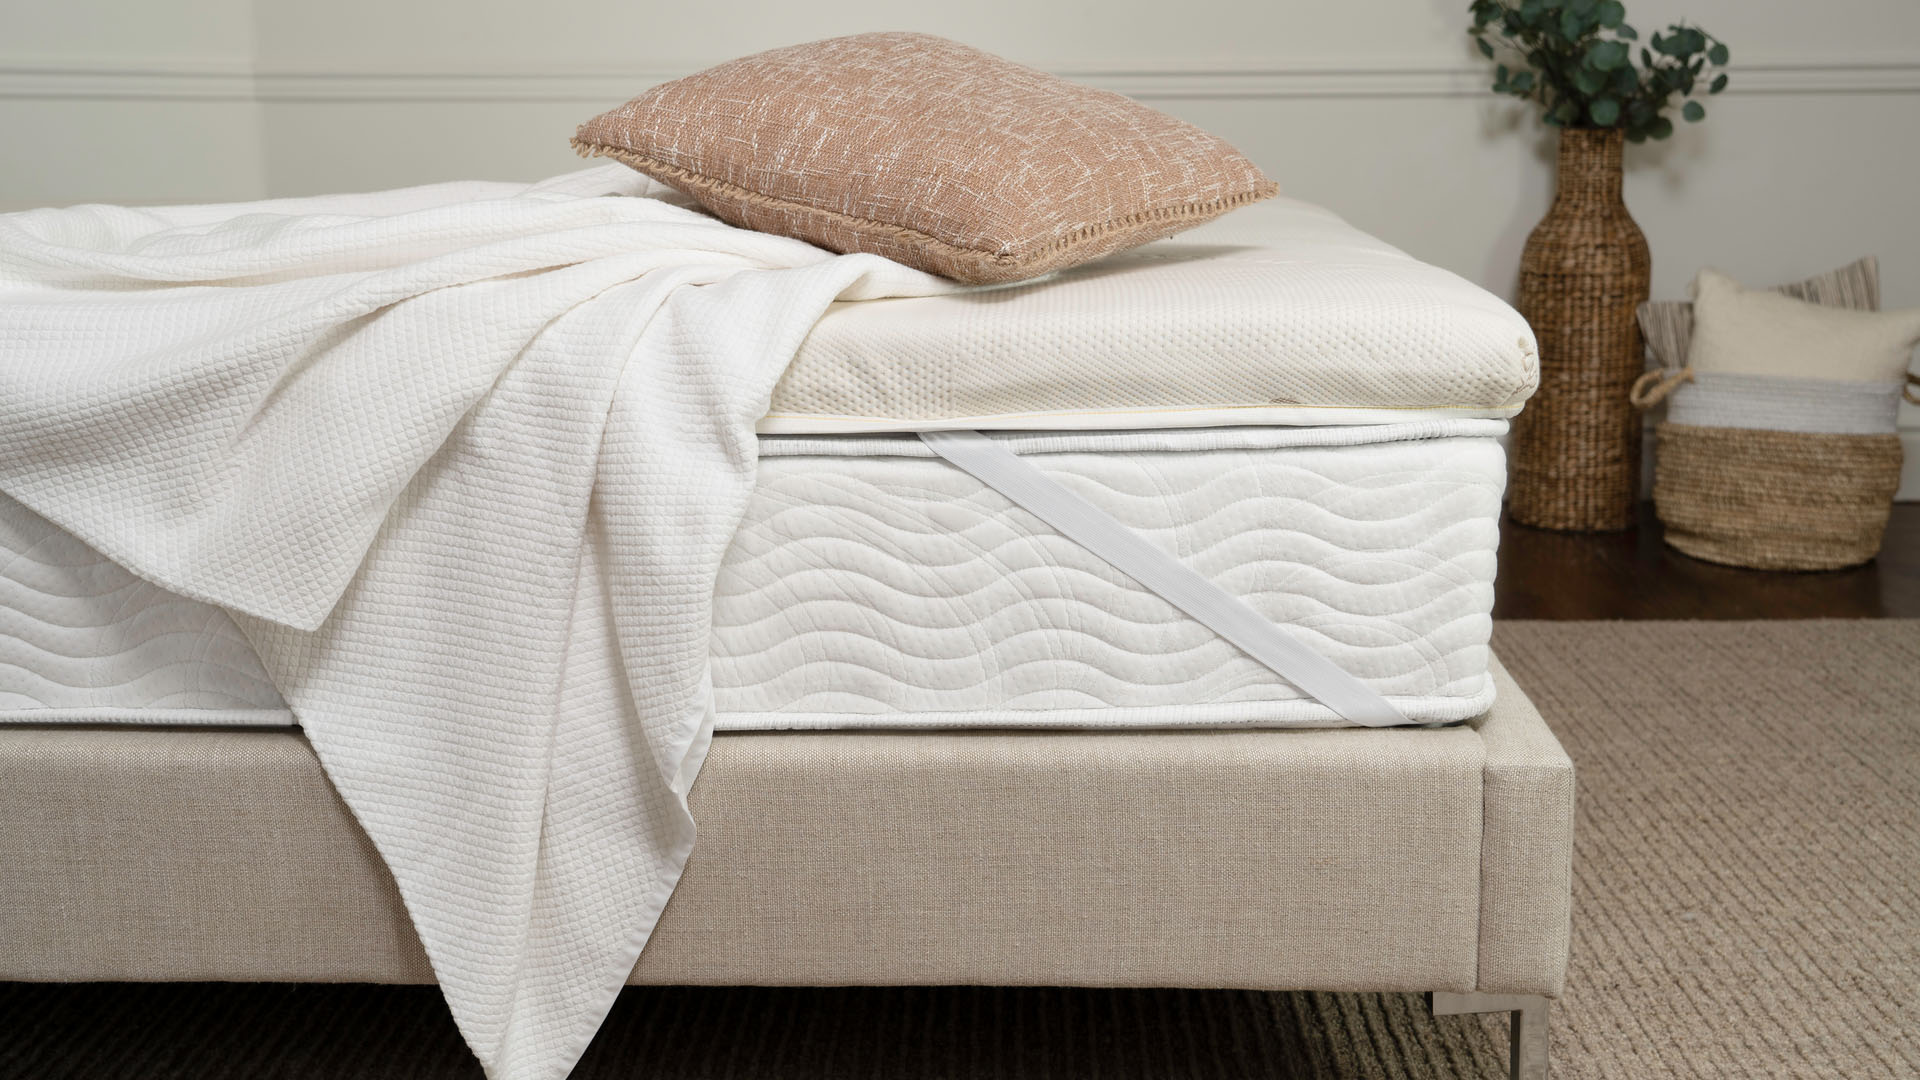 Which Saatva mattress topper should I buy? All the different options